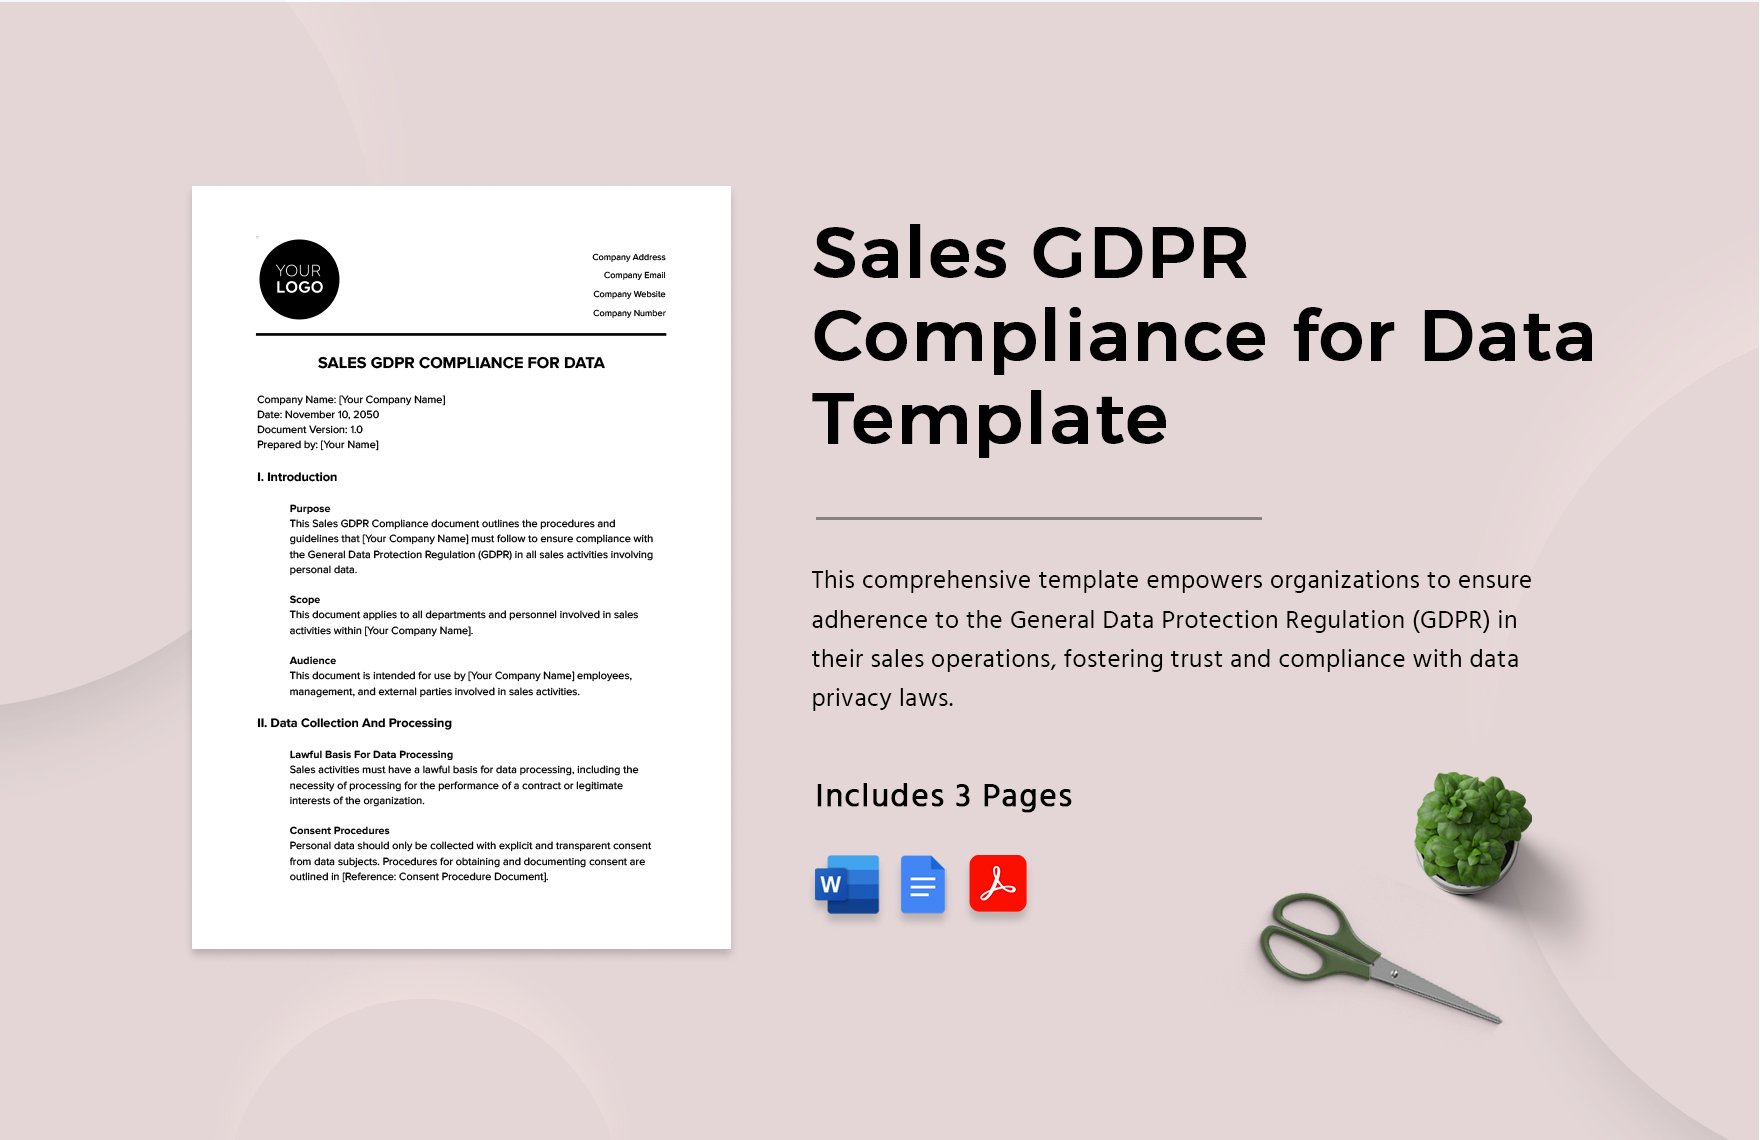 Sales GDPR Compliance for Data Template